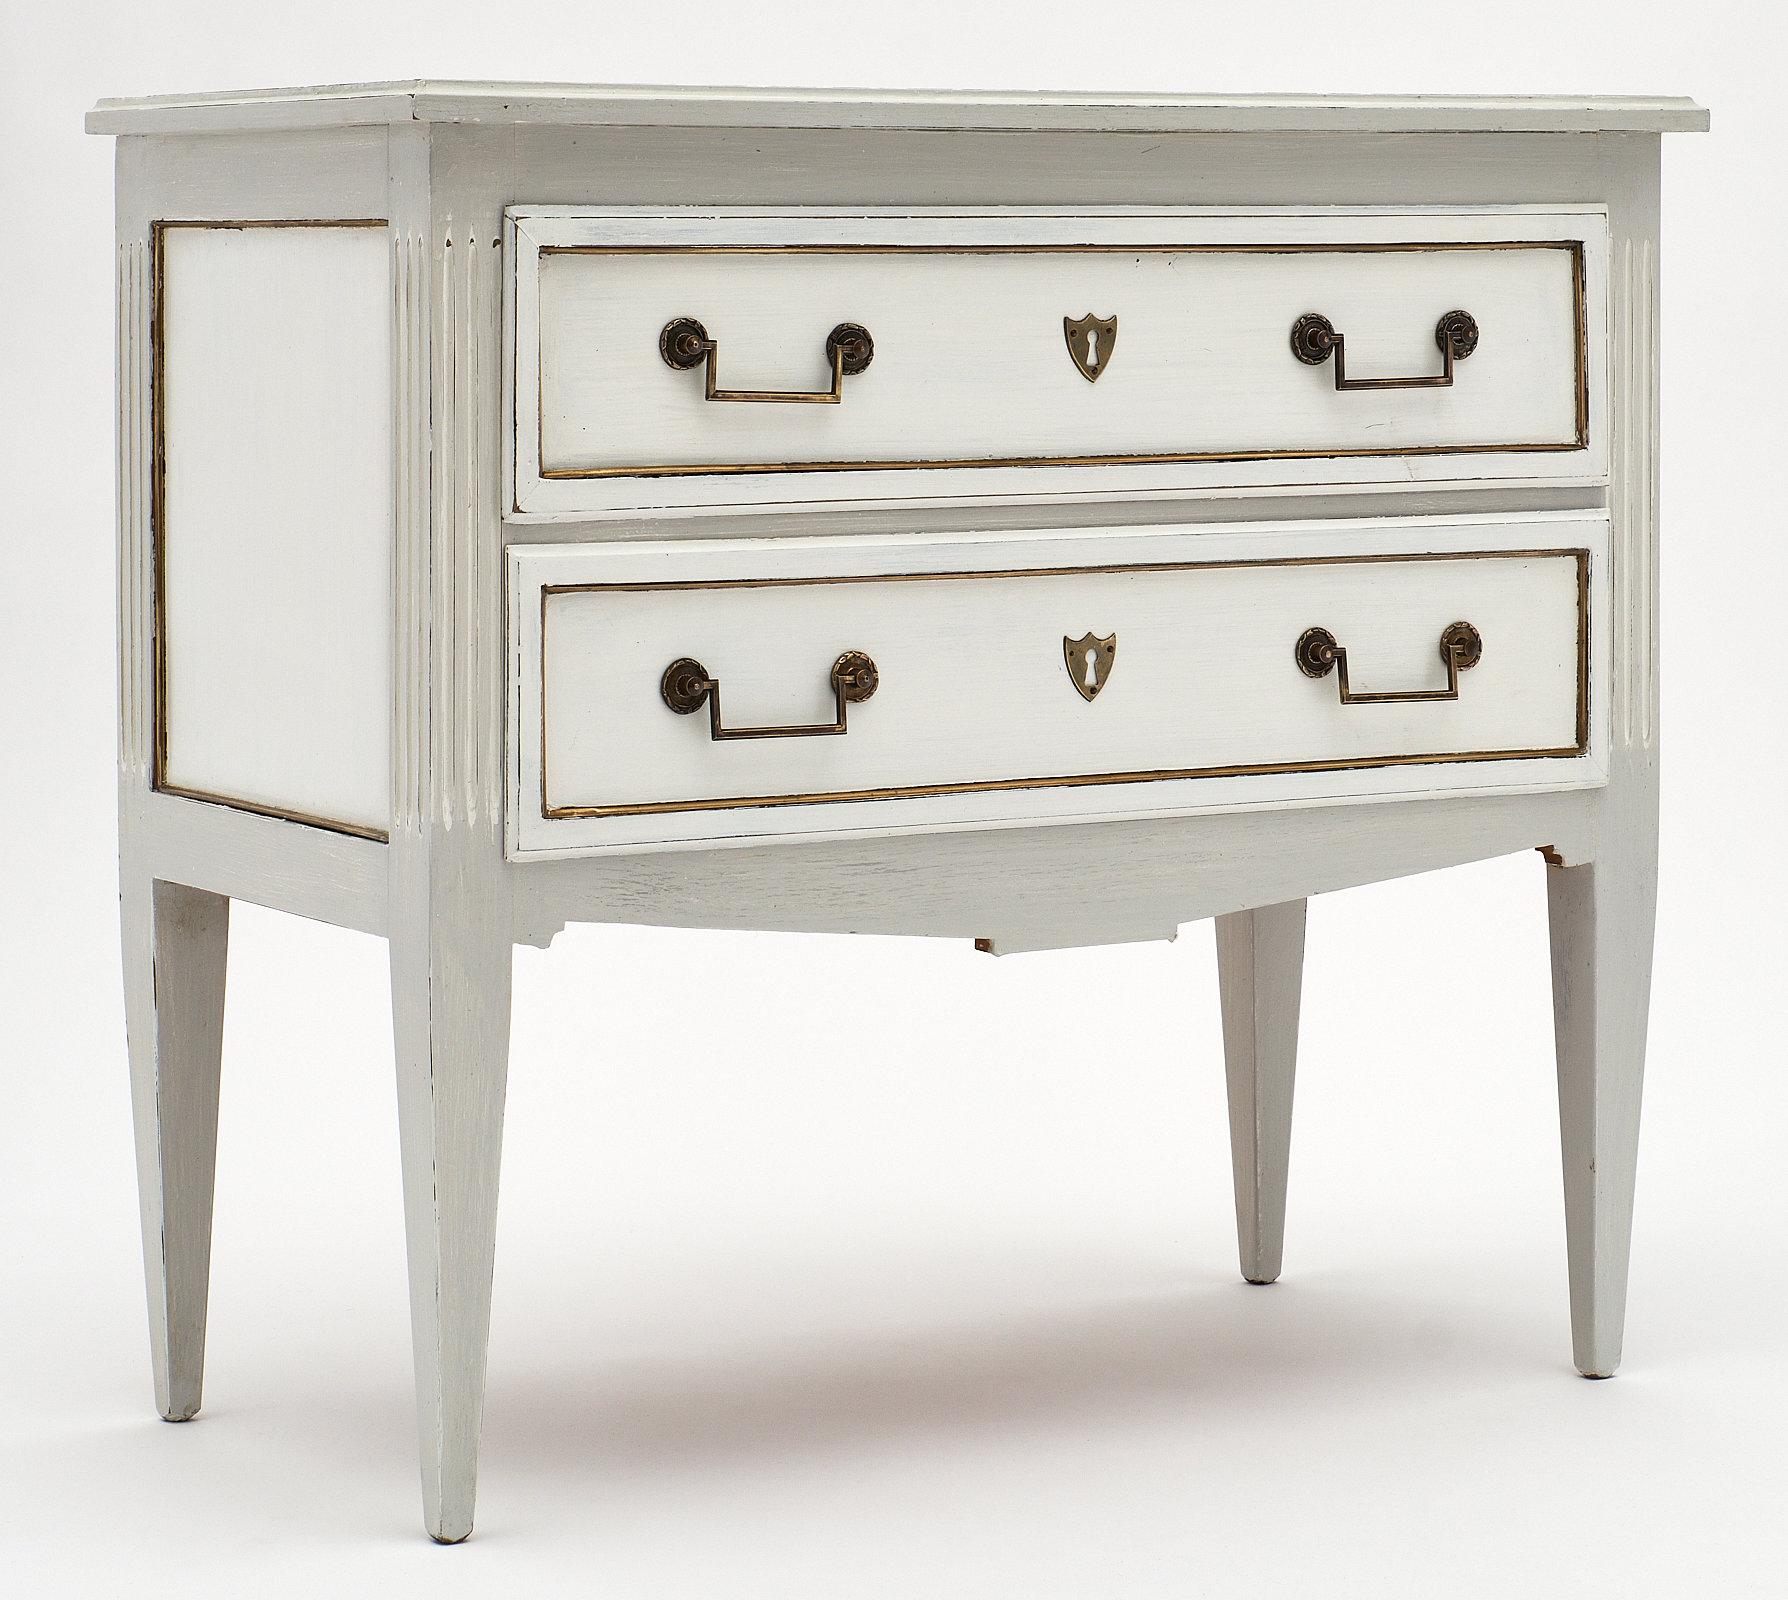 Painted Louis XVI style chest with brass trim. This elegant, petite chest of drawers “commode sauteuse” is made of cherry wood and features a “Trianon” gray and white patina, brass hardware and trims. Two large dovetailed drawers offer ample